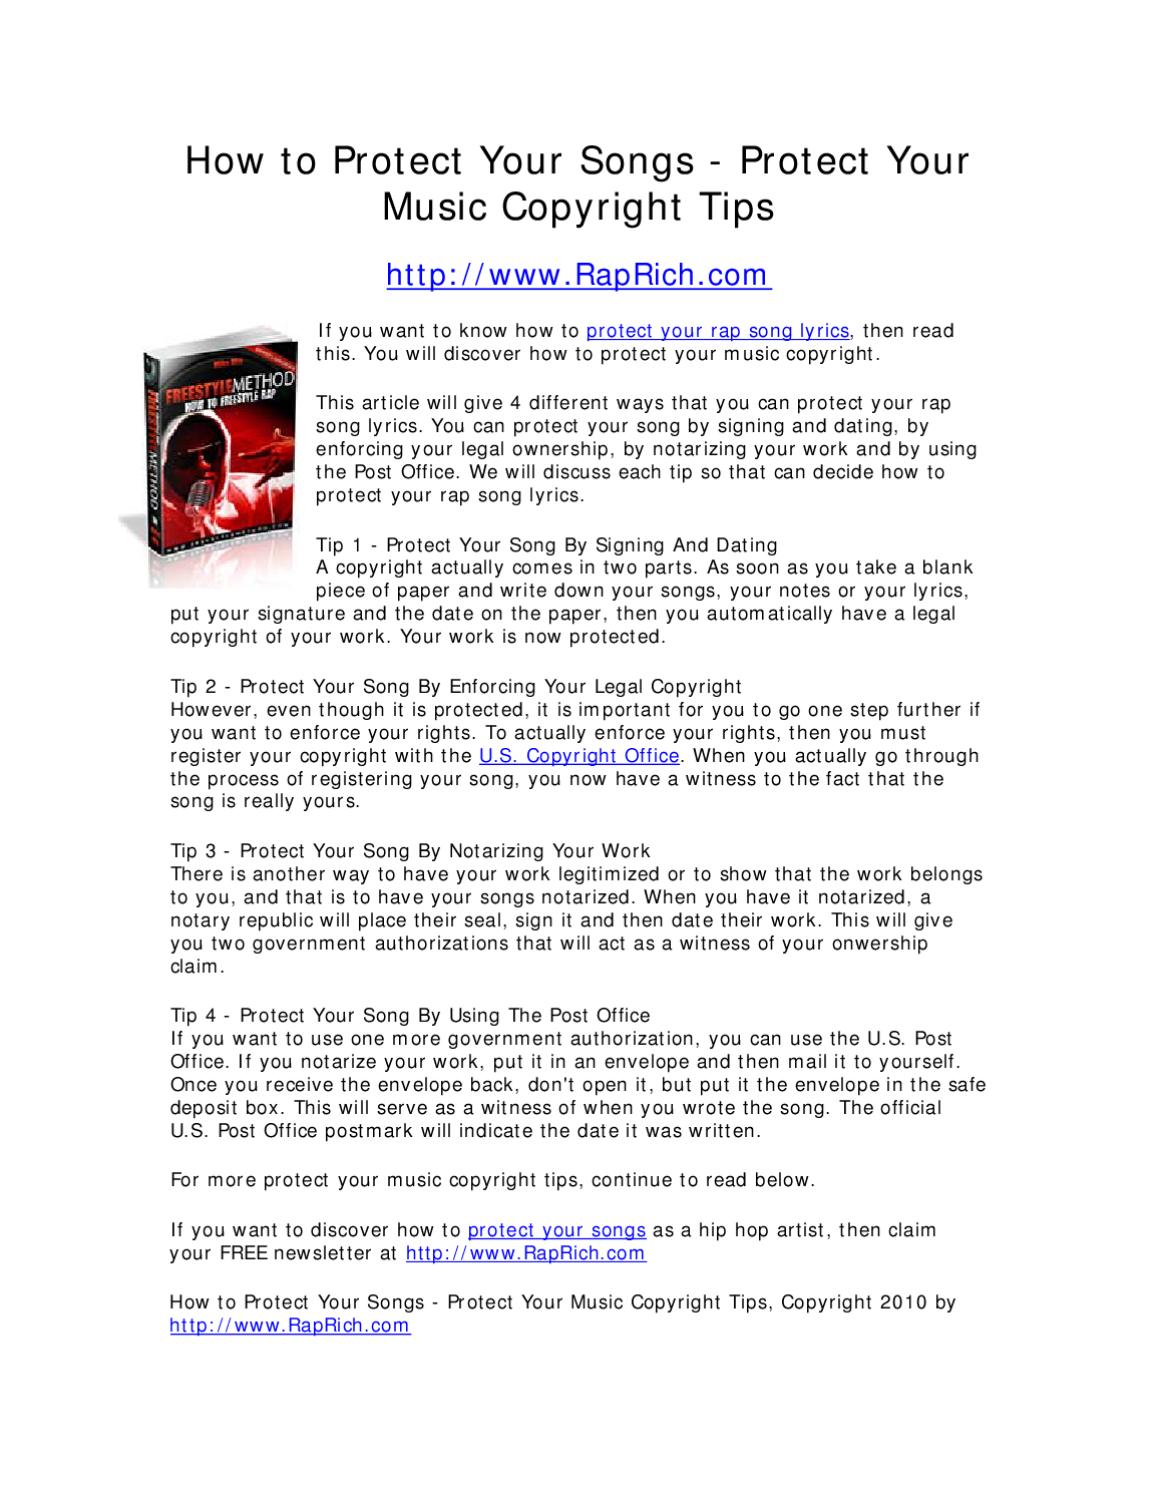 How to Protect Your Songs – Protect Your Music Copyright Tips